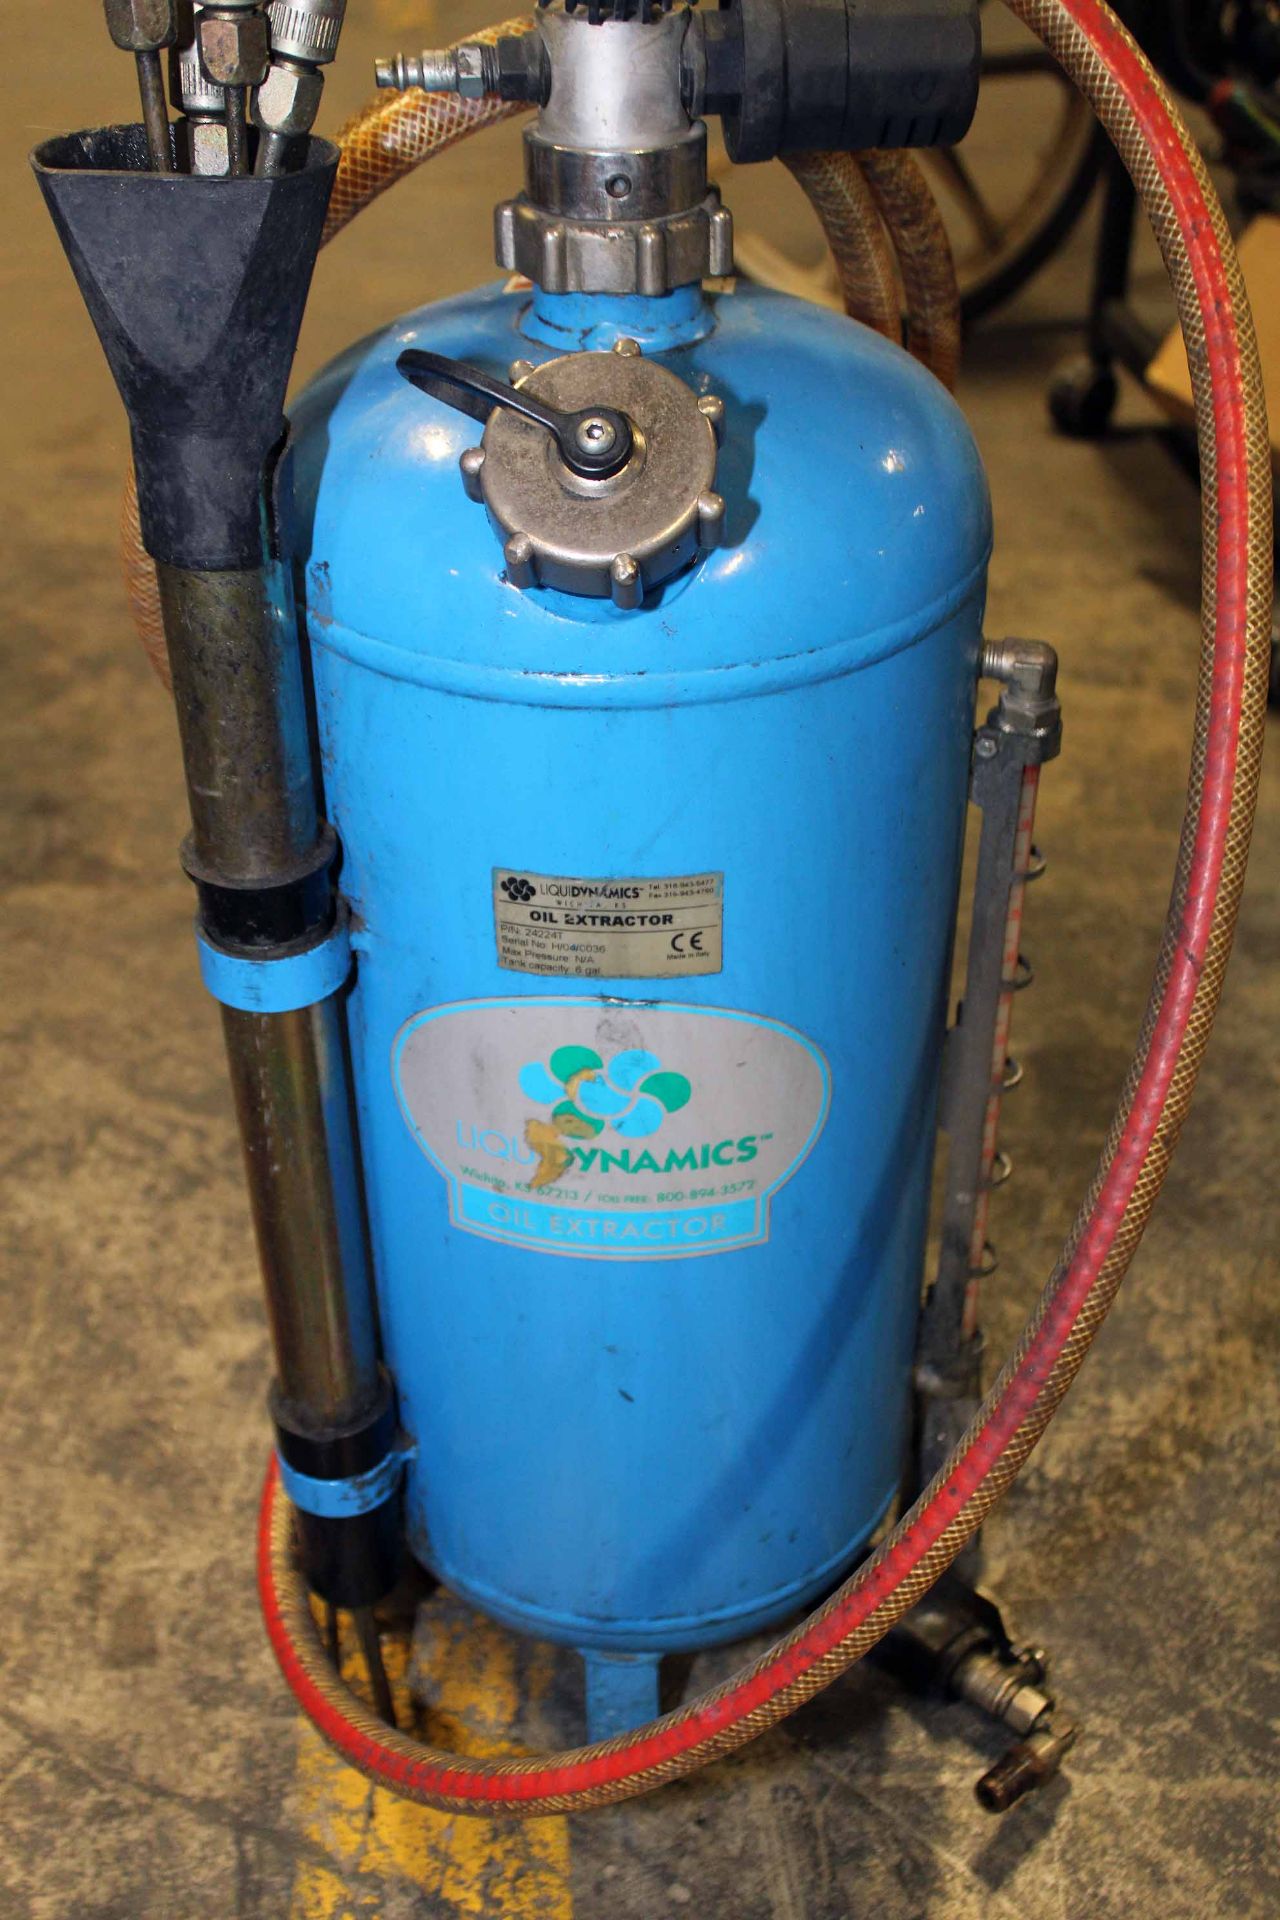 LIQUIDYNAMICS 8 GAL. OIL/ FLUID EXTRACTOR, air operated - Image 2 of 2